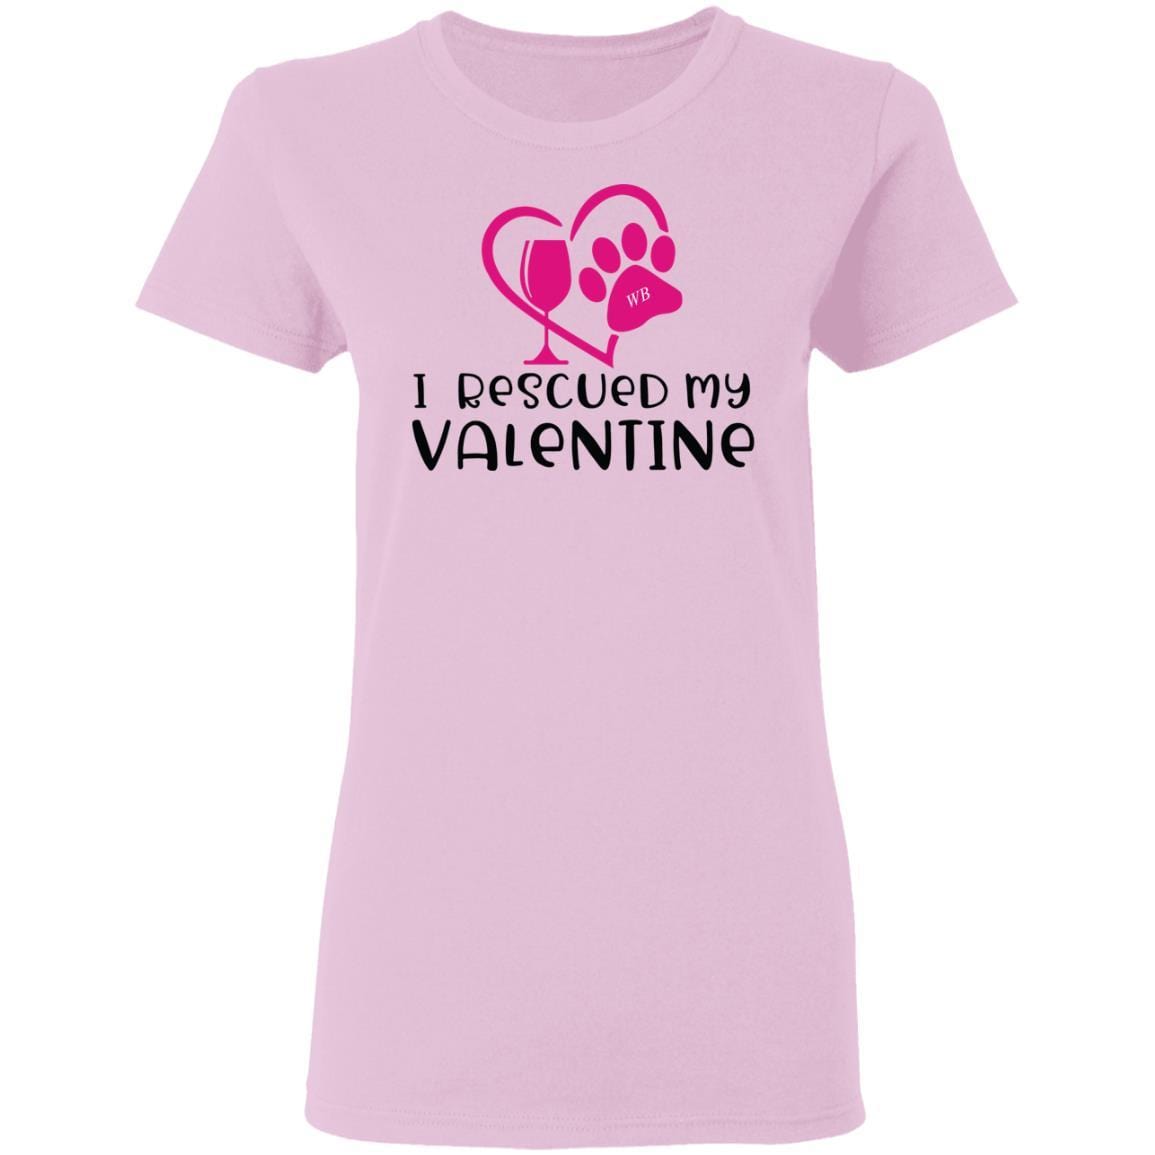 T-Shirts Light Pink / S Winey Bitches Co "I Rescued My Valentine" Ladies' 5.3 oz. T-Shirt WineyBitchesCo